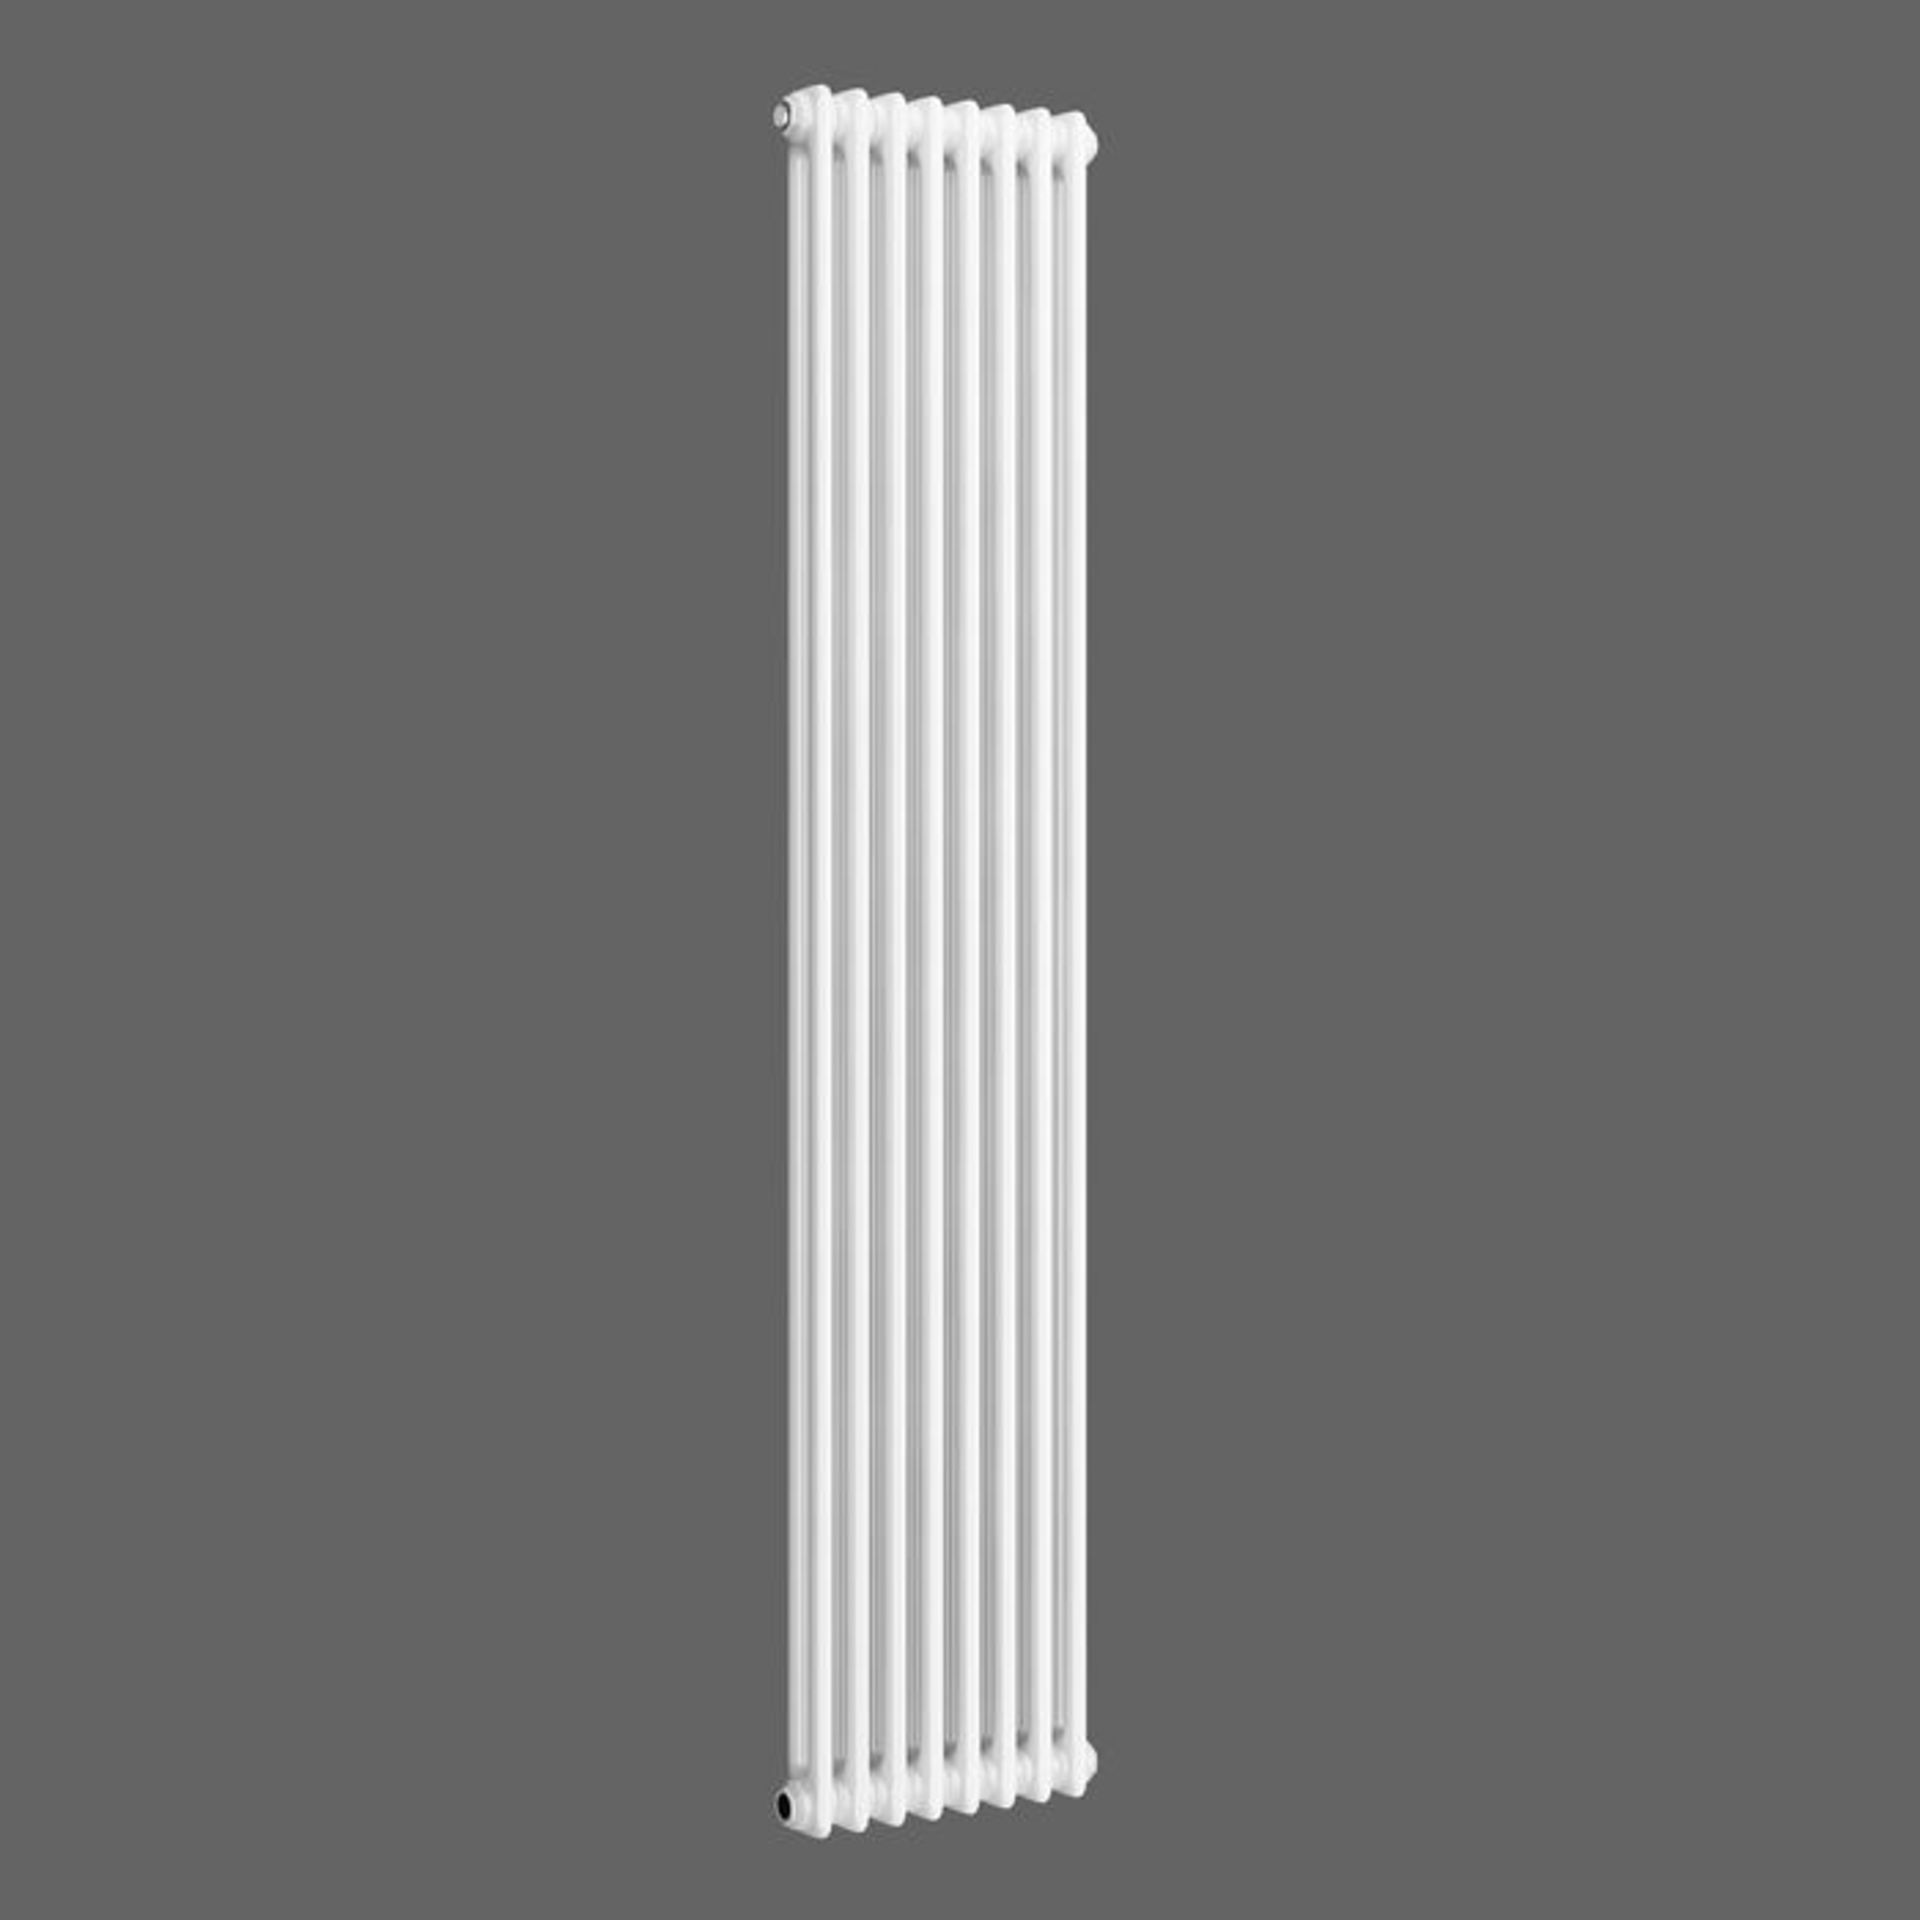 (H148) 2000x398mm White Double Panel Vertical Colosseum Traditional Radiator. RRP £429.99. Fo... - Image 5 of 5